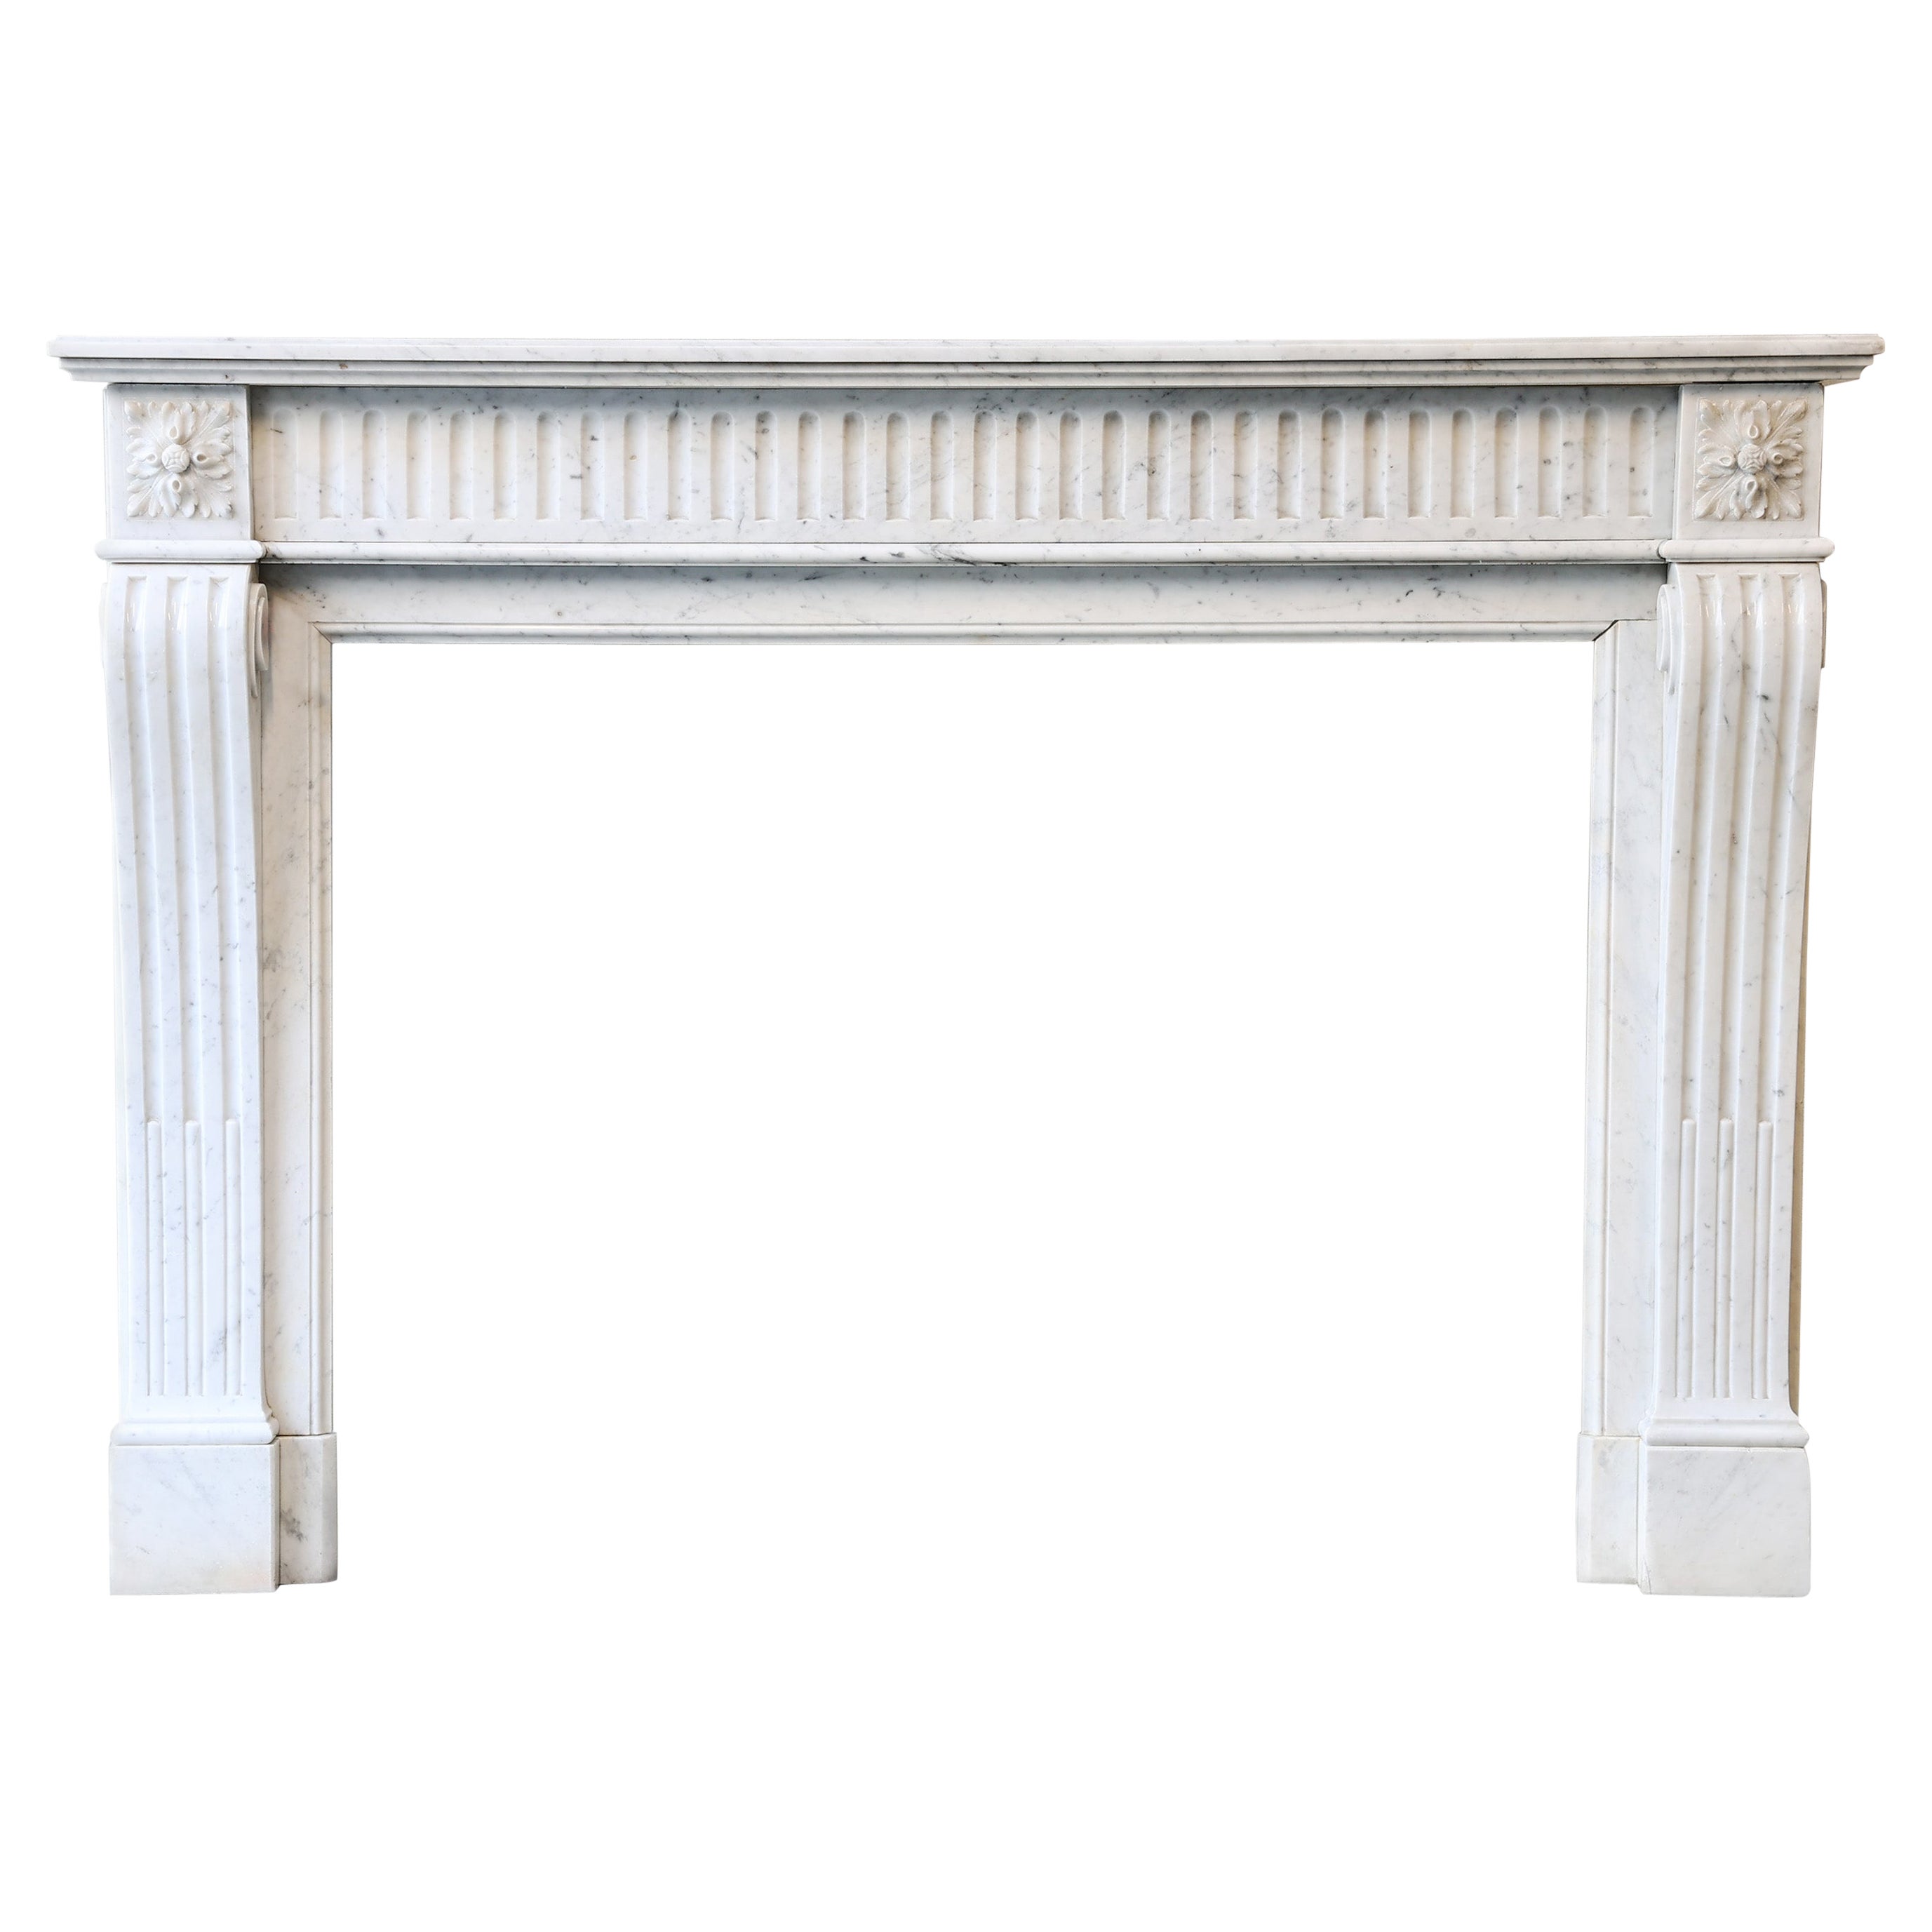 Antique Marble Fireplace  19th Century  Carrara Marble